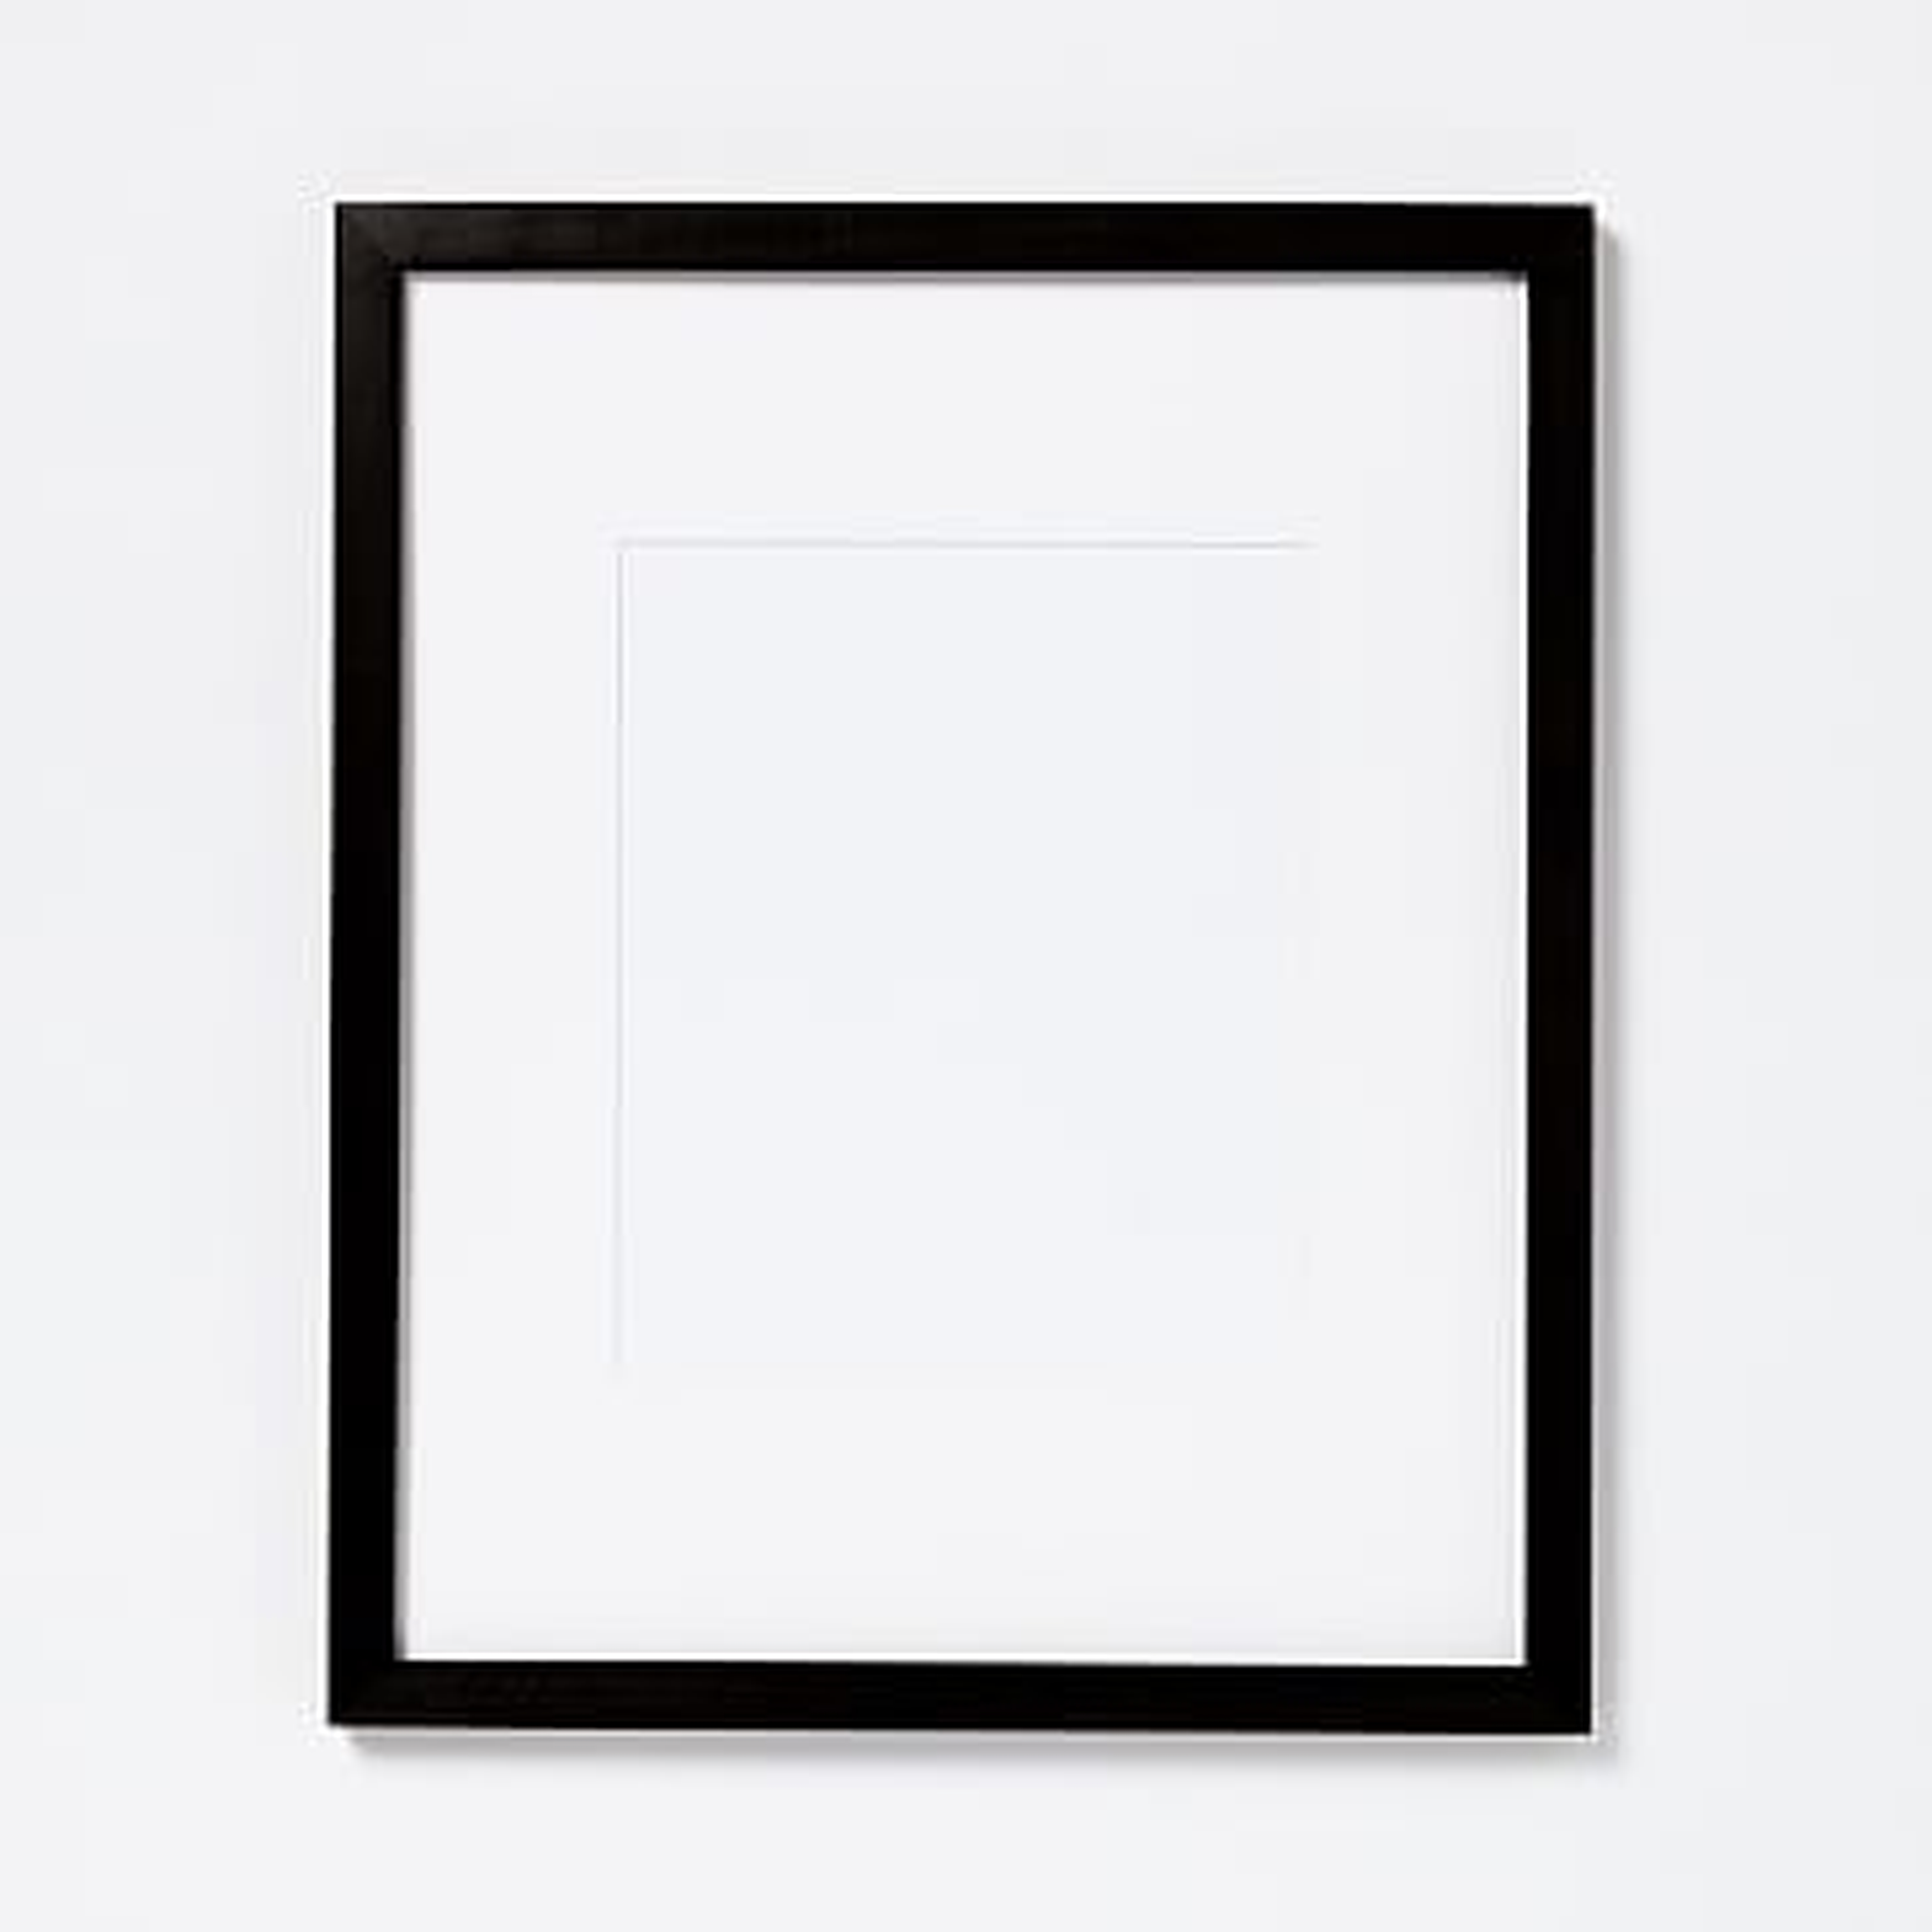 Gallery Frames, 8"x 10" (13" x 16" without mat), Black Lacquer - West Elm